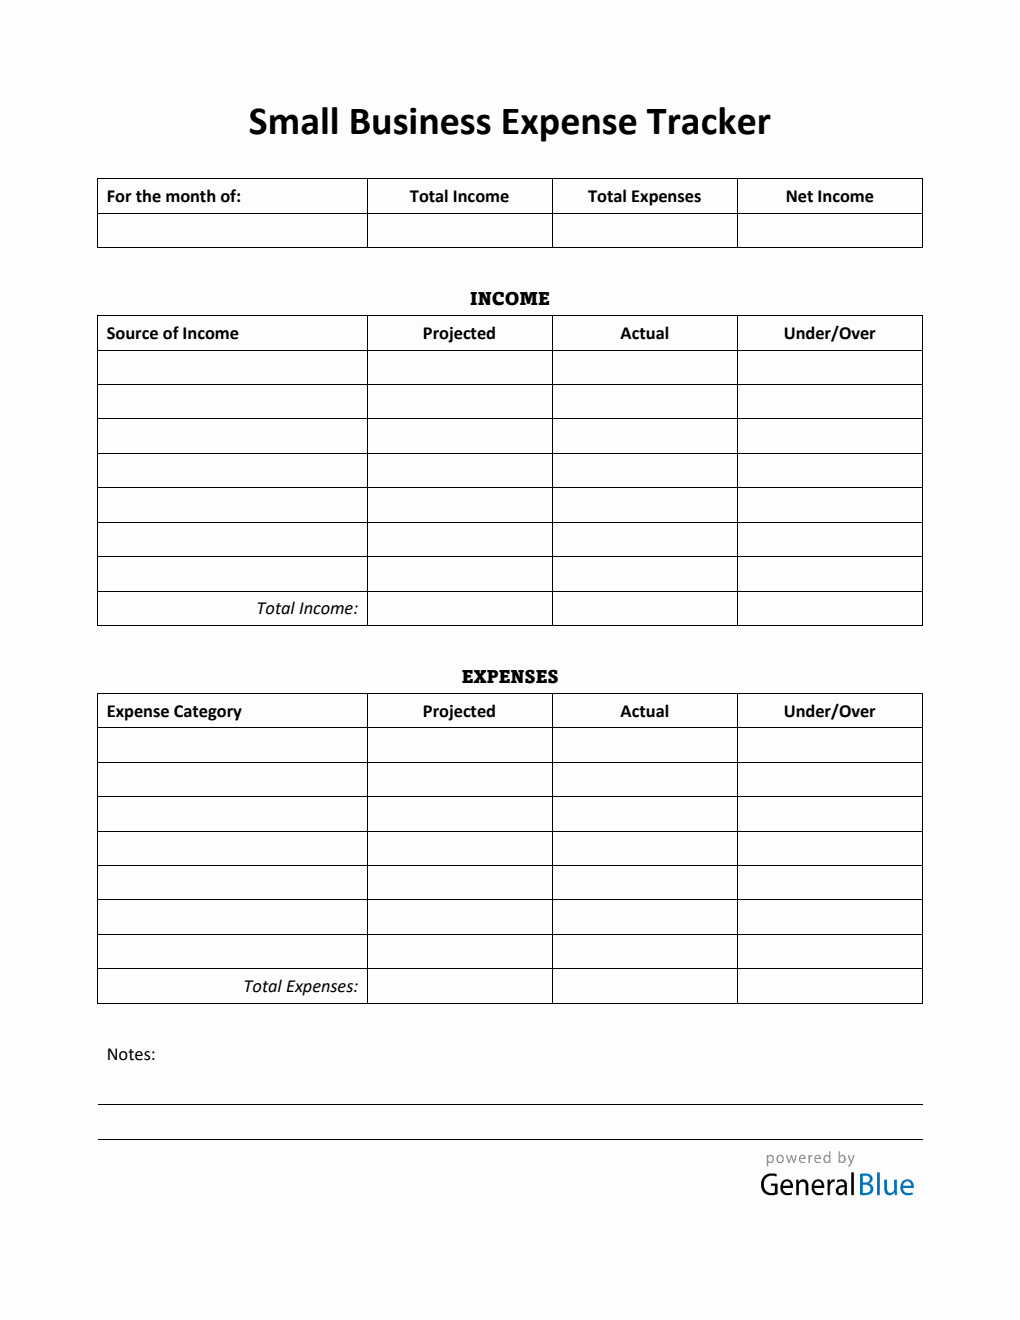 Small Business Expense Tracker in Word (Printable)